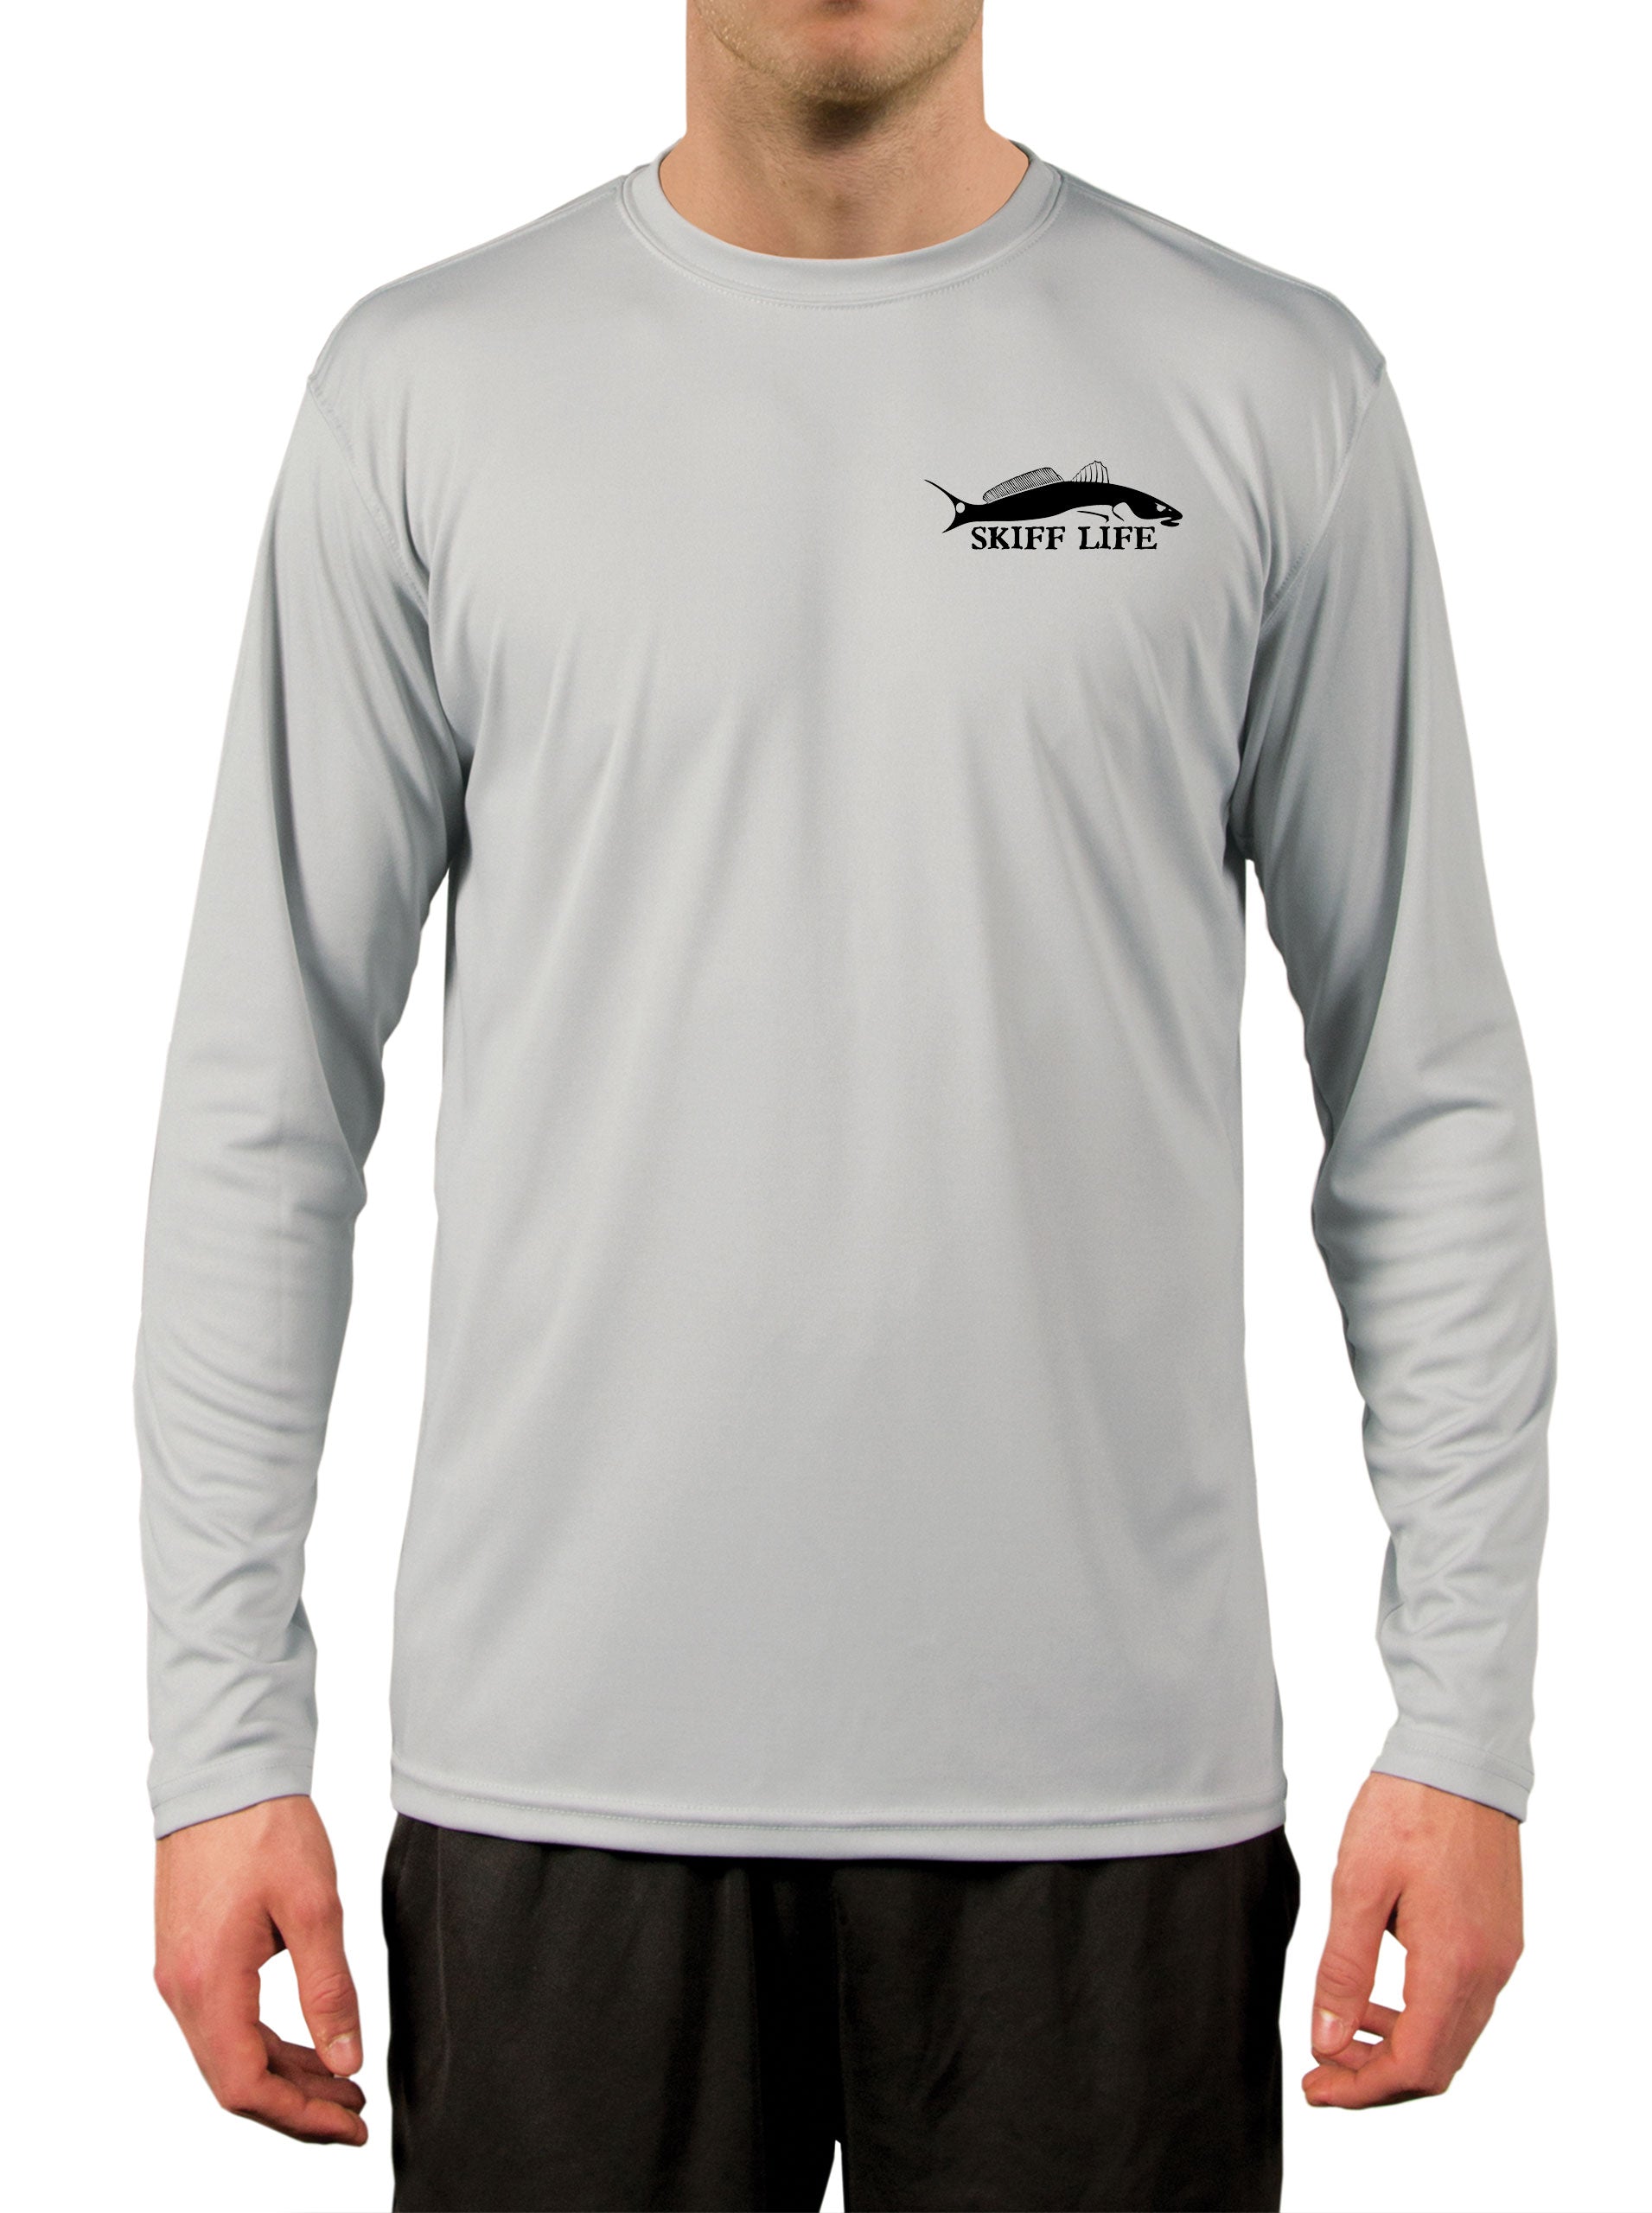 Gulf Coast Mullet Snook Fishing Shirts with Optional Sleeve: Florida Flag or Snook Scale - Skiff Life